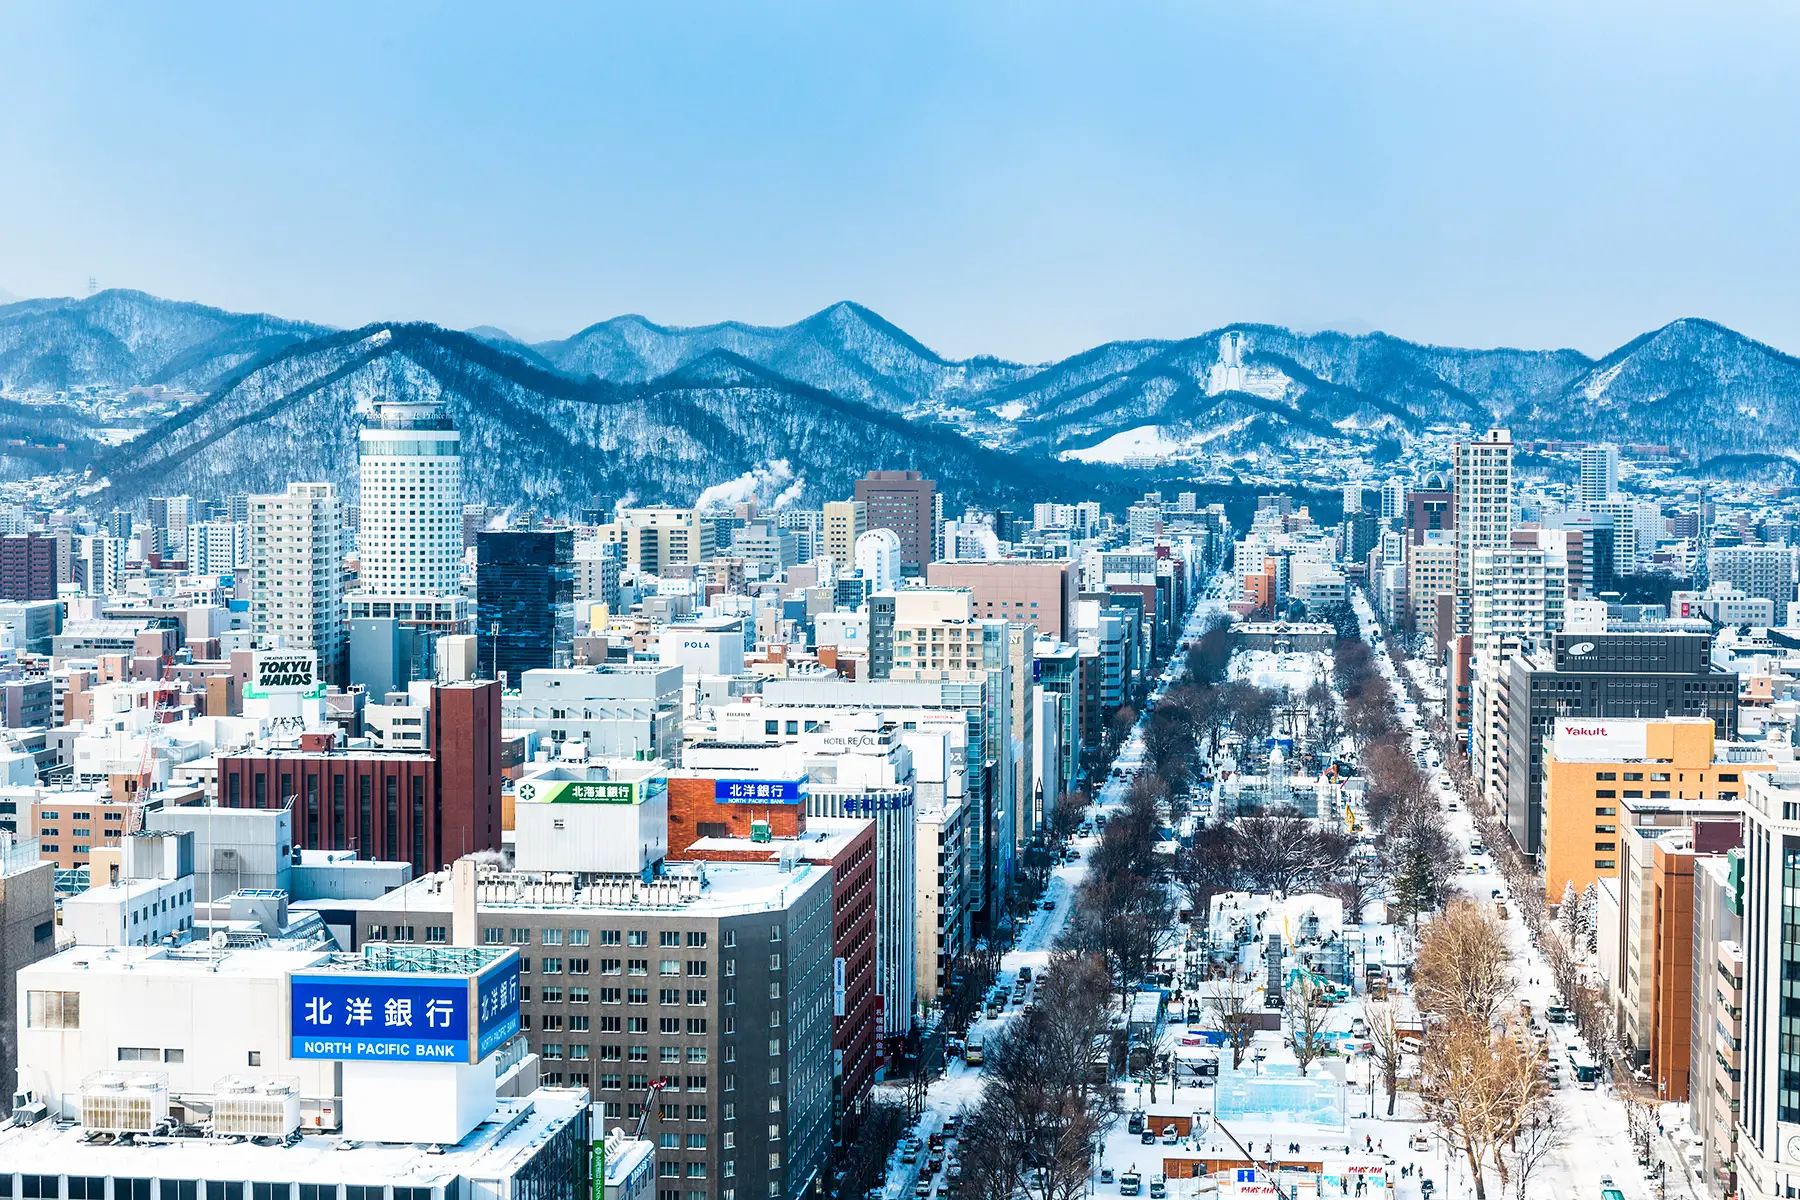 A view of Sapporo from above during the winter